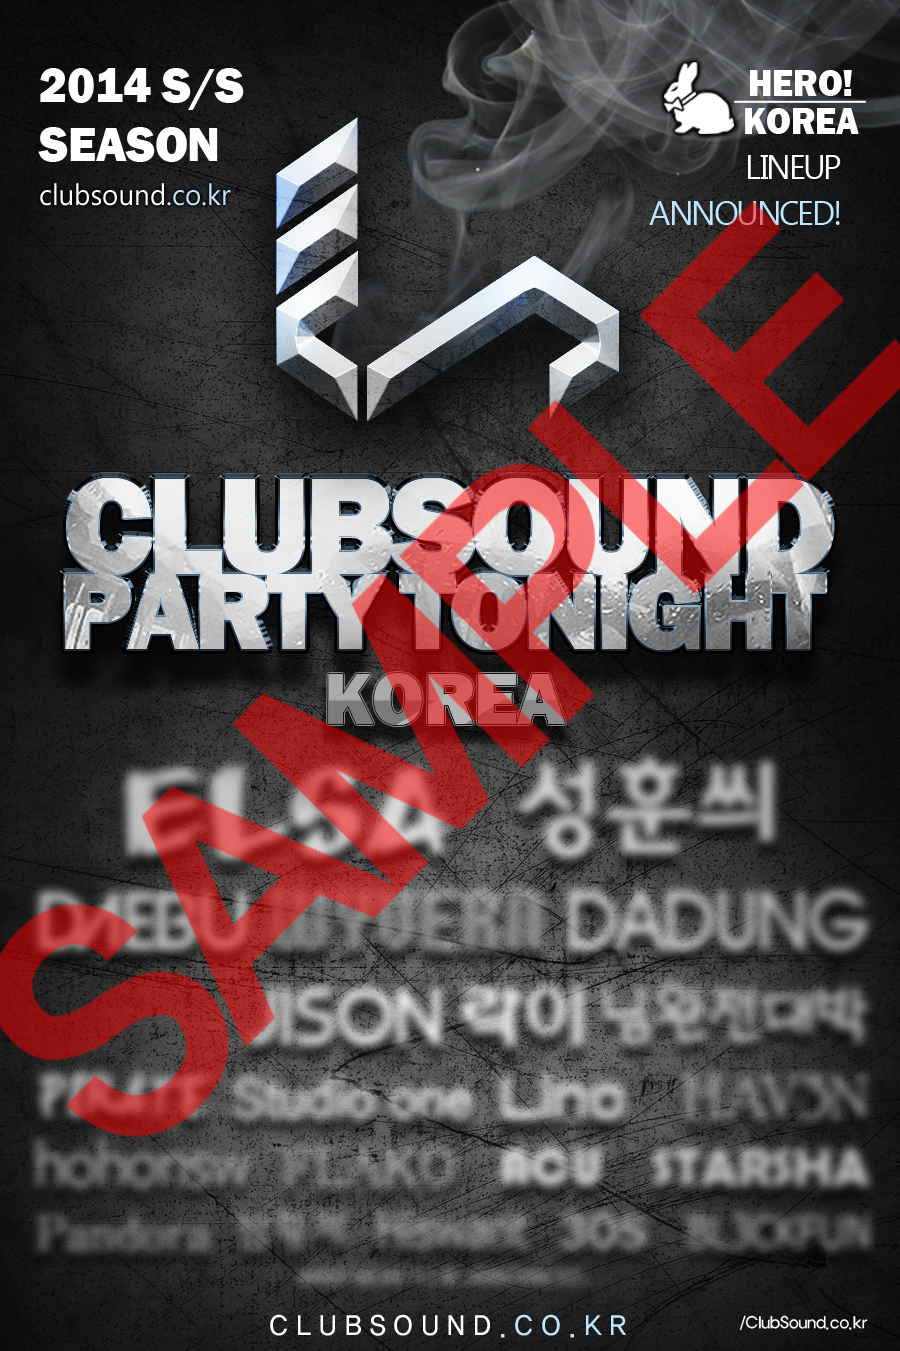 2014 SS Clubsound Partytonight Lineup Poster.png